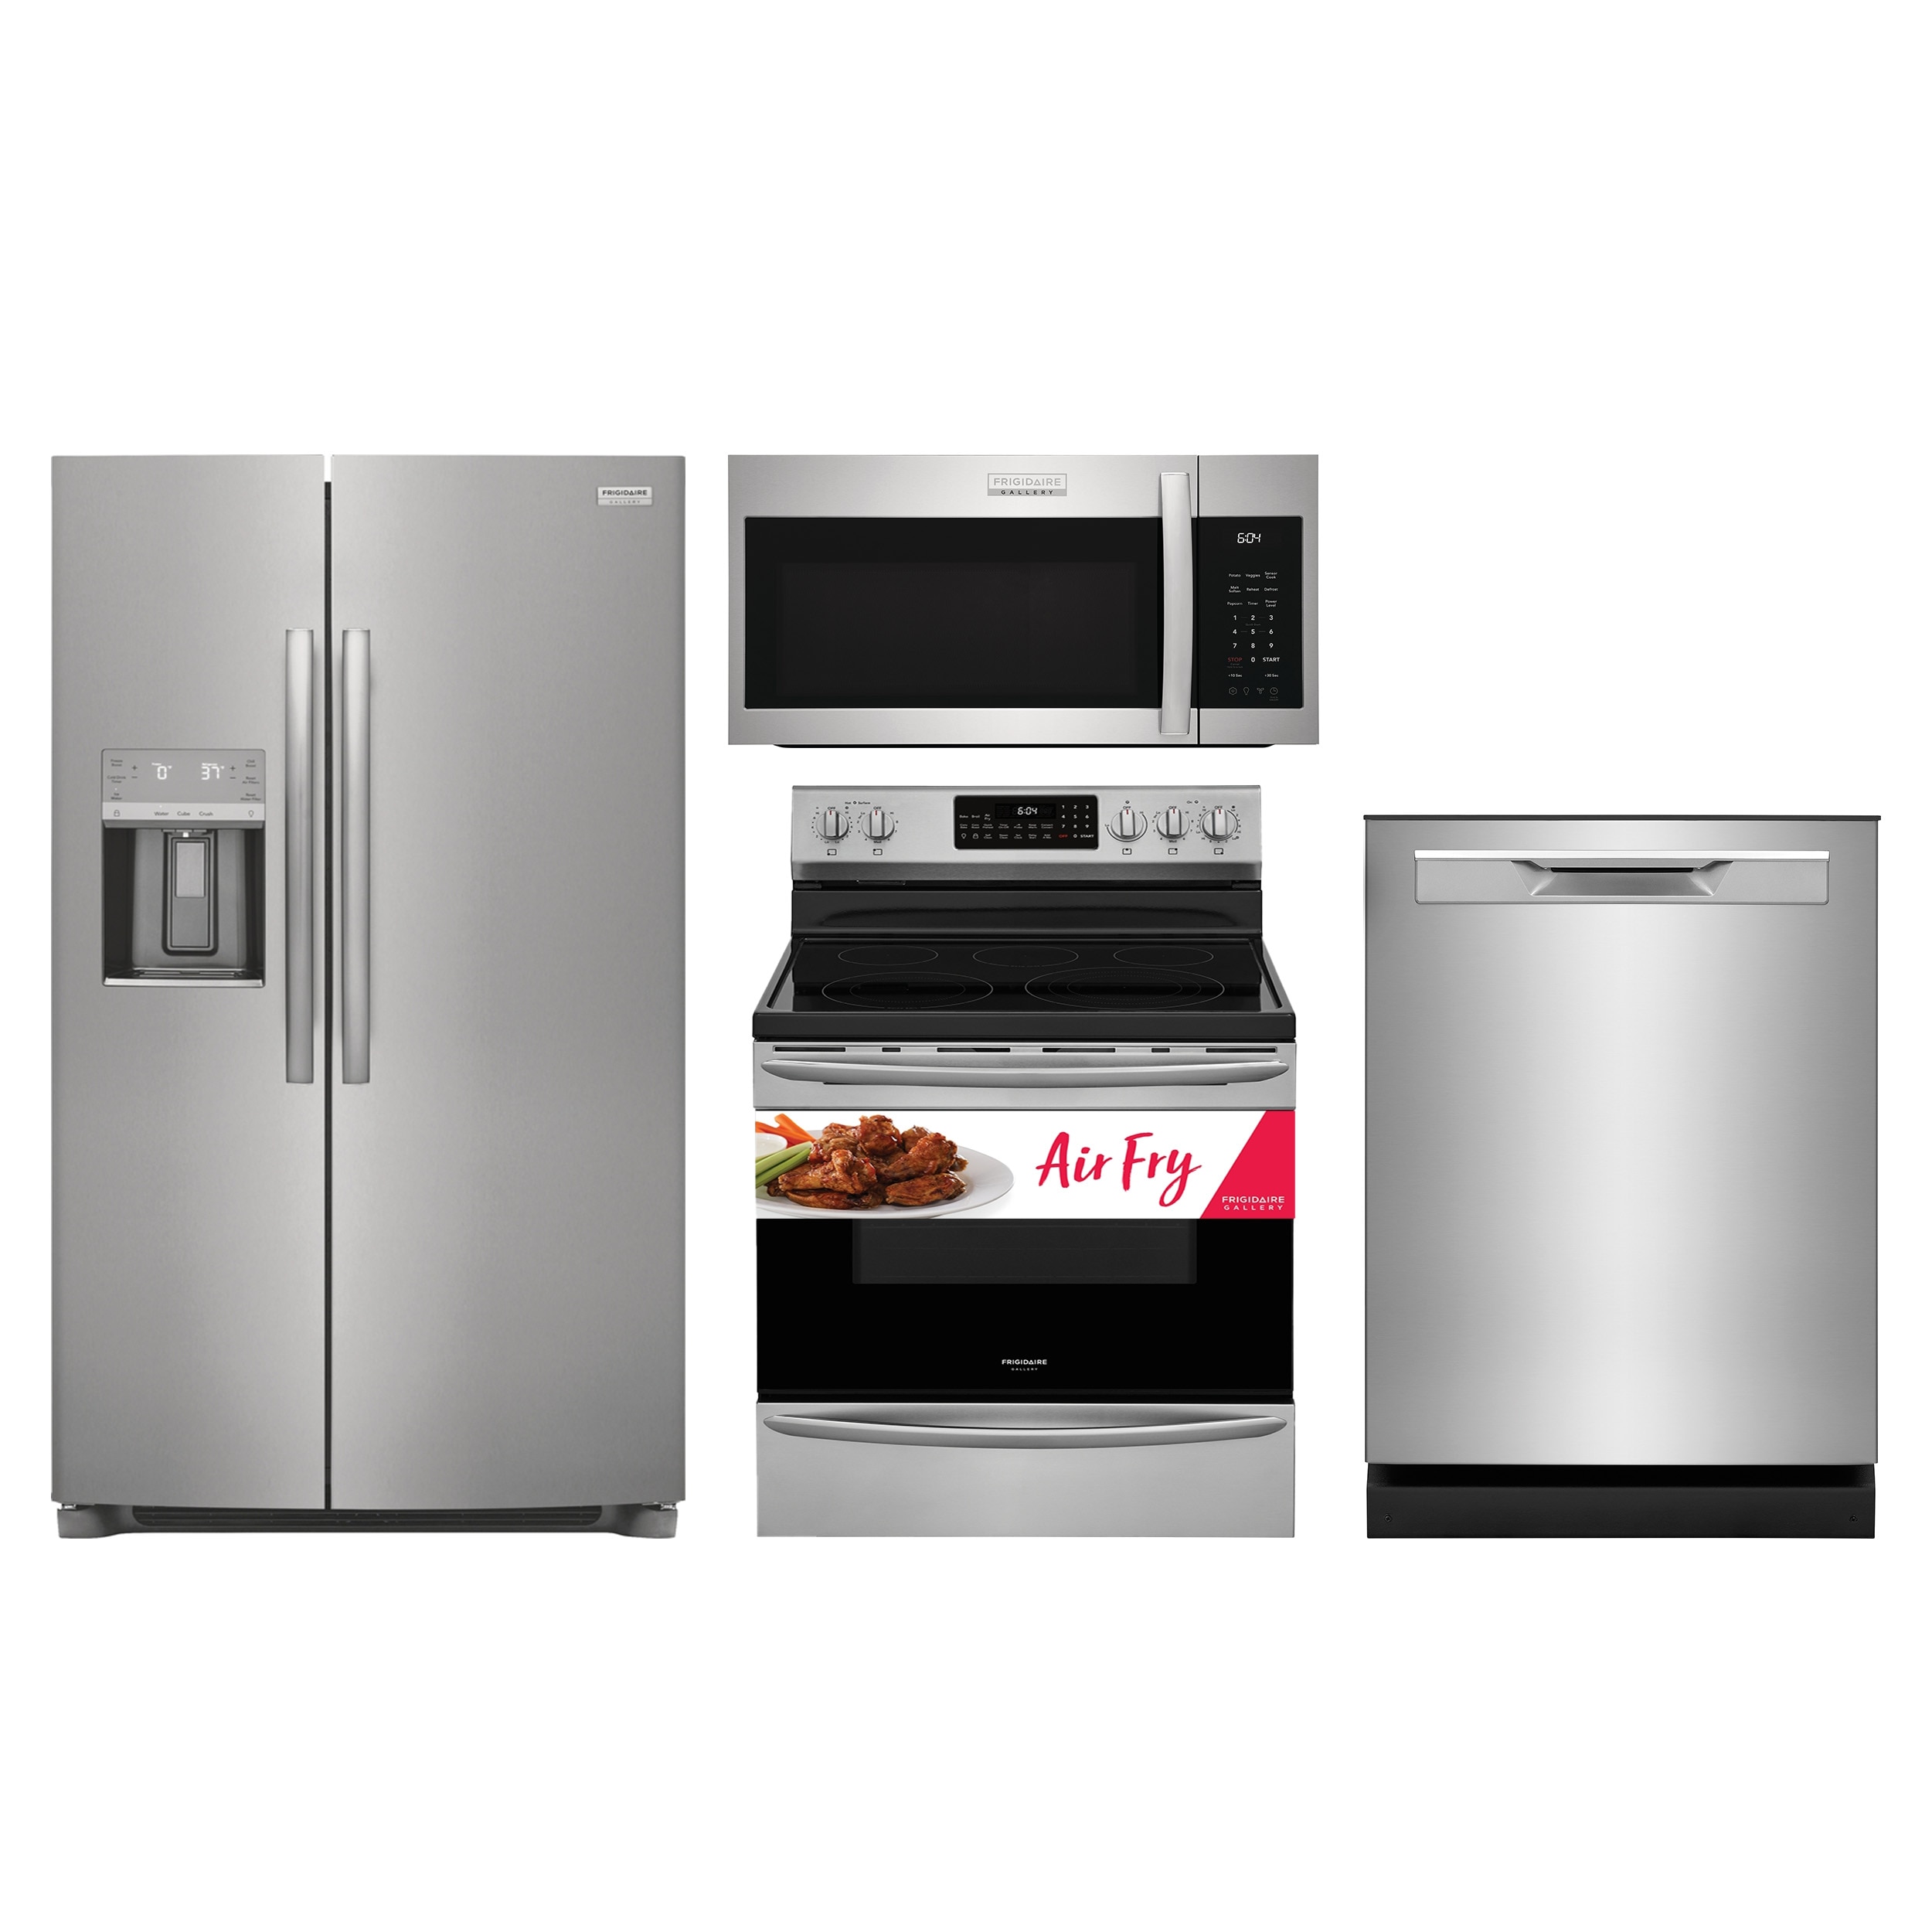 frigidaire 25.6-cu ft side-by-side refrigerator & electric range with  self-clean & air fry 4pc suite in smudge-proof stainless steel